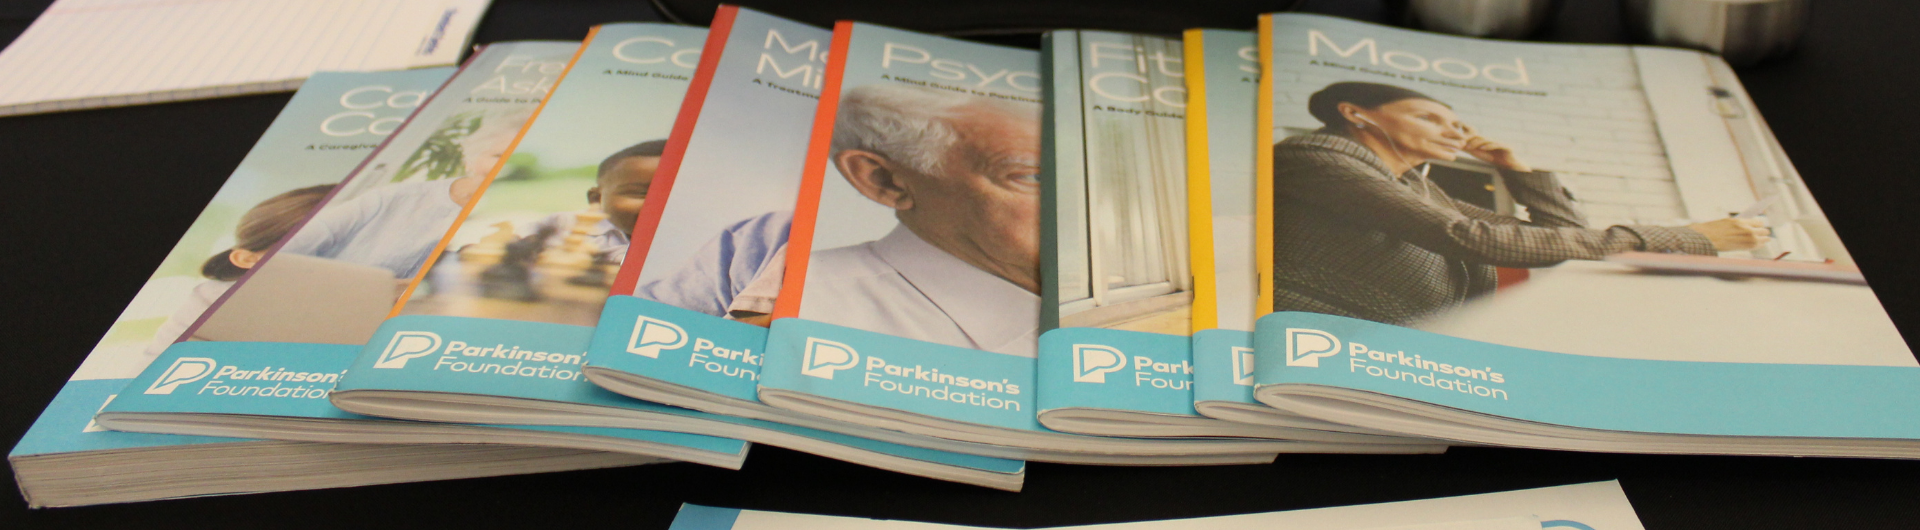 Parkinson's Foundation books and information